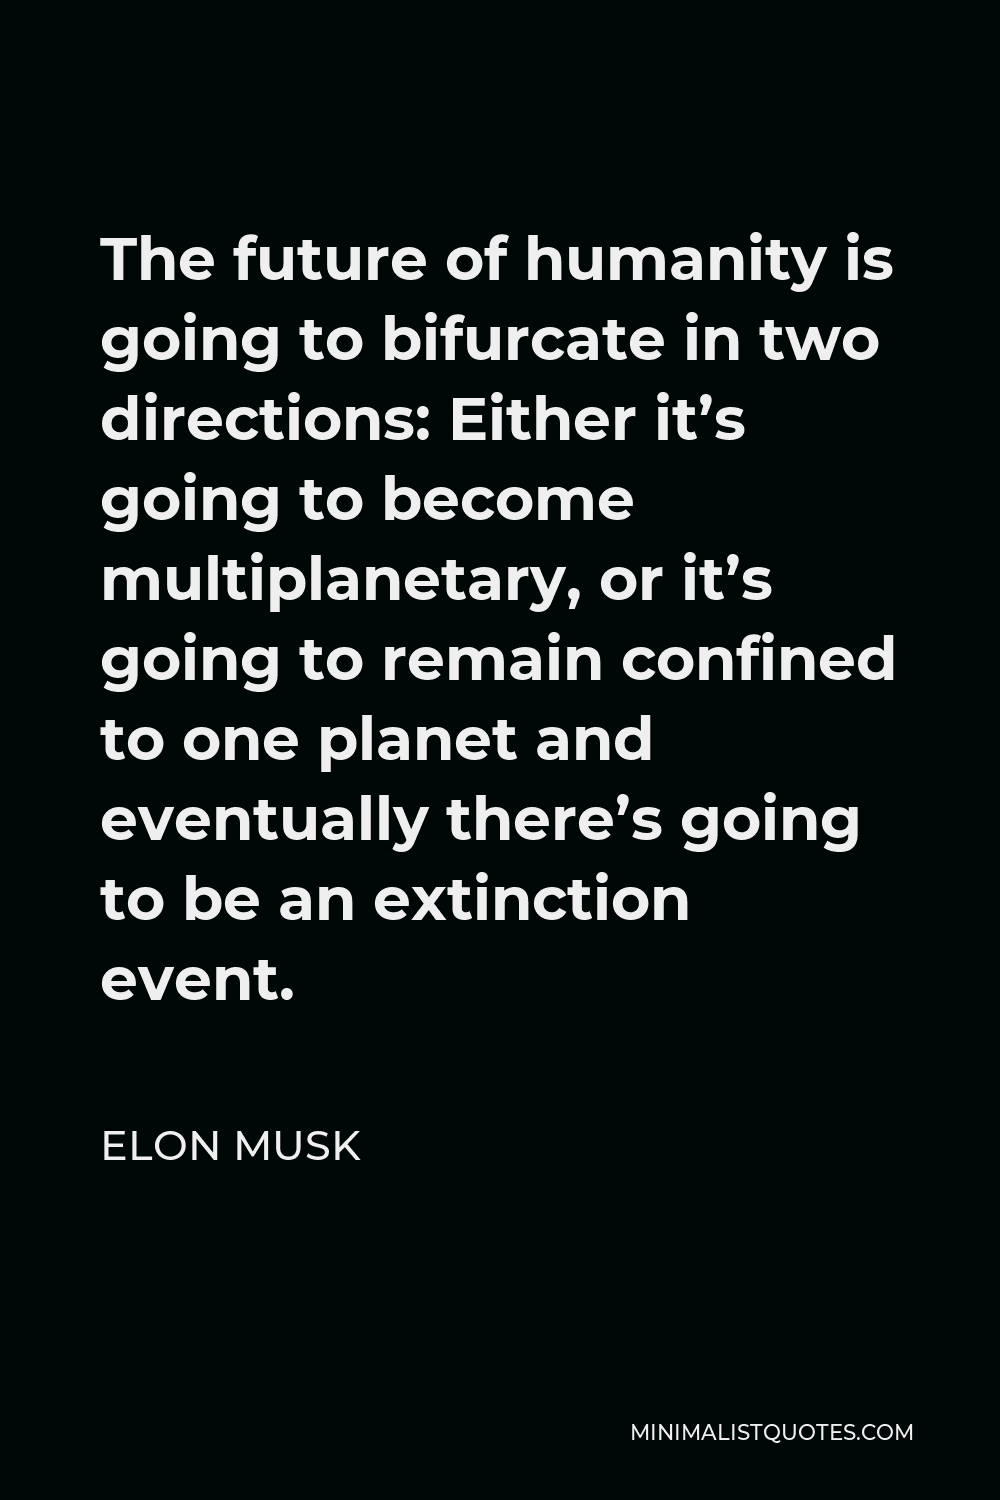 Elon Musk Quote: The future of humanity is going to bifurcate in ...